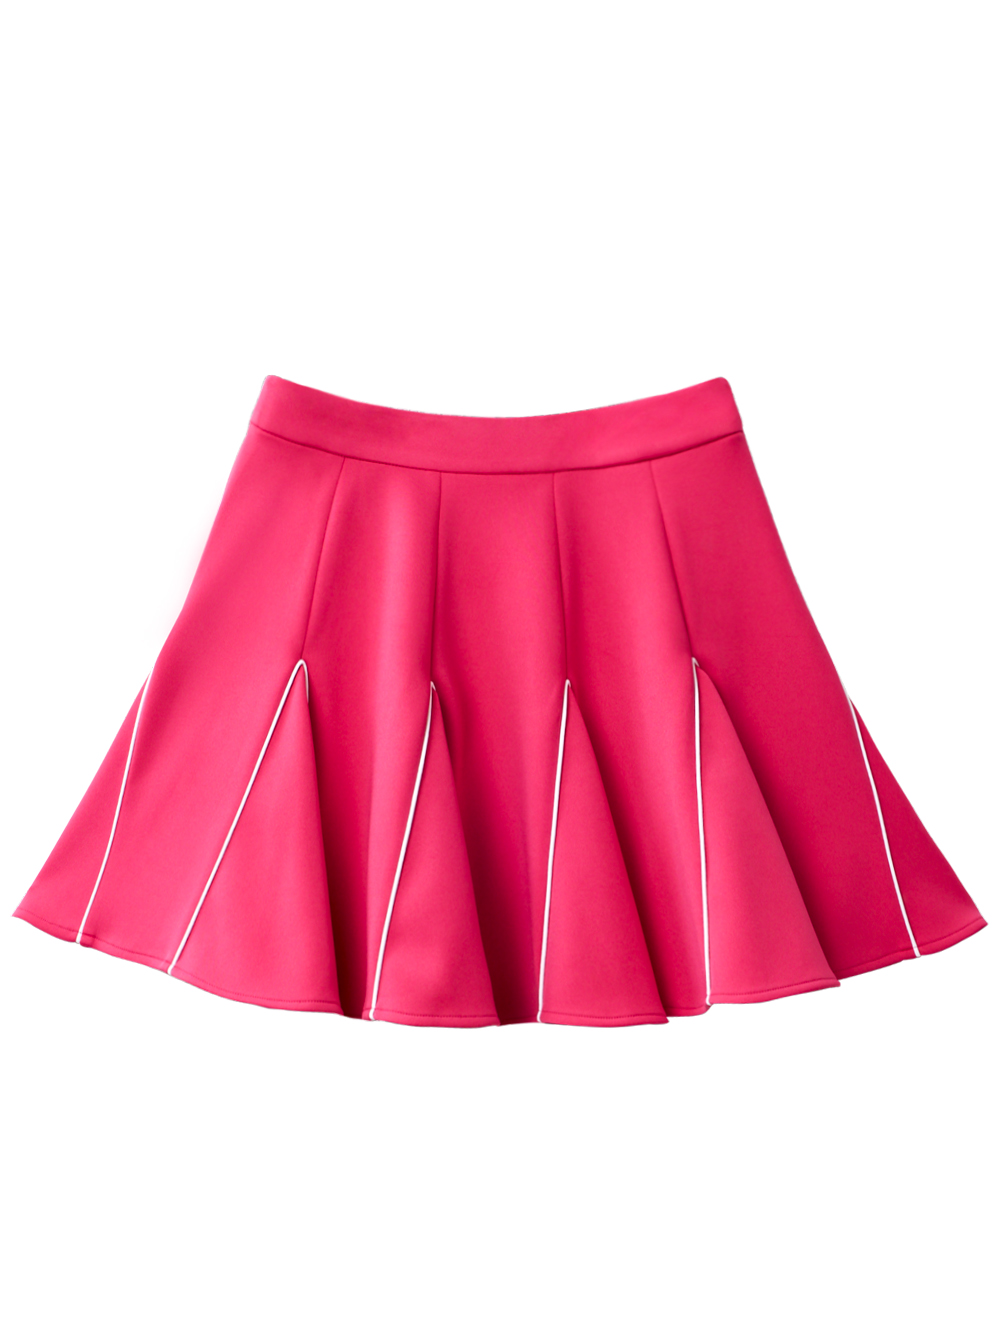 UTAA Wild Panther Color Flare Skirt  :  Pink (UC4SKF326PK)